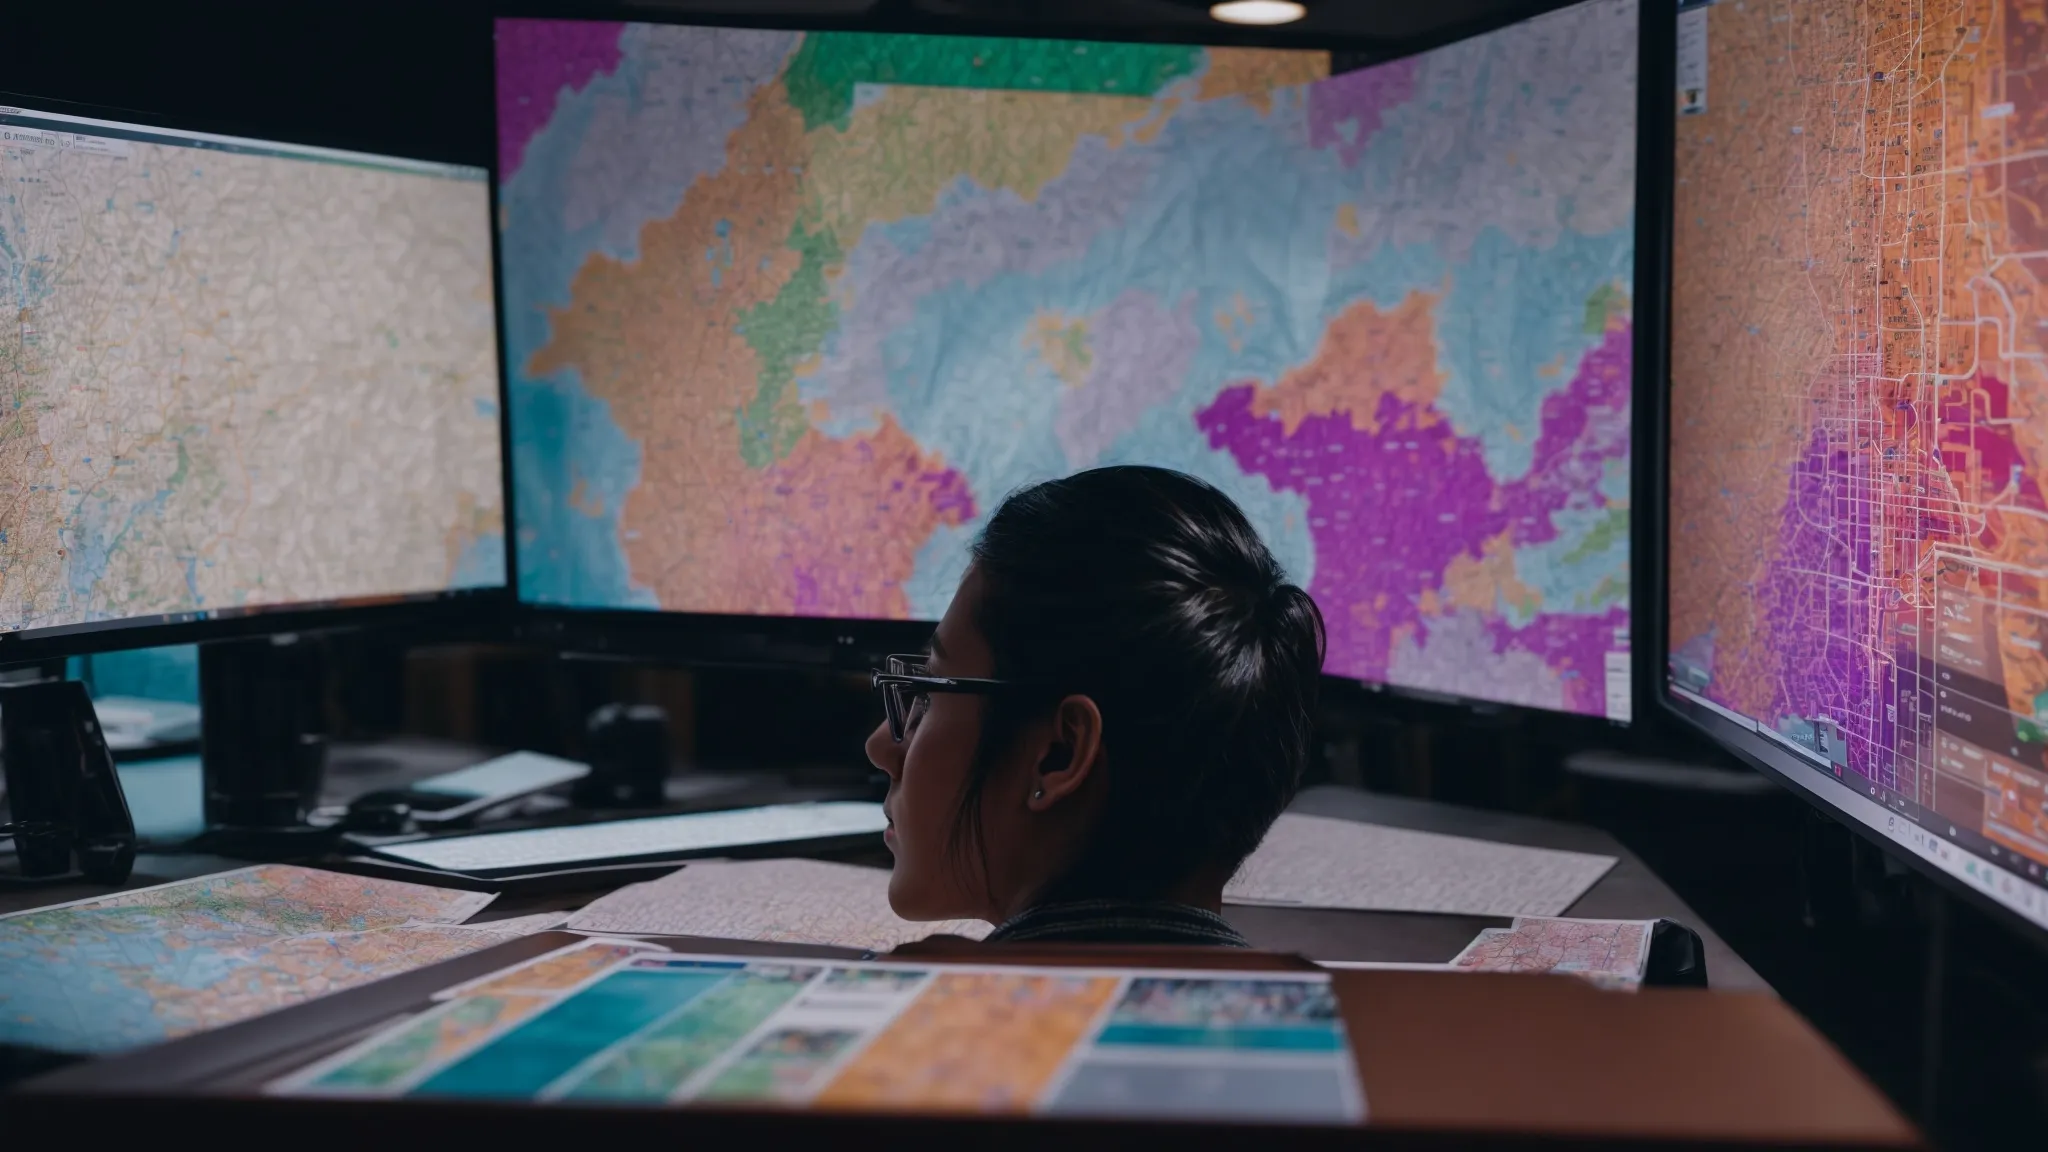 a person sitting at a computer, analyzing a colorful digital map representing local business data and seo strategies.